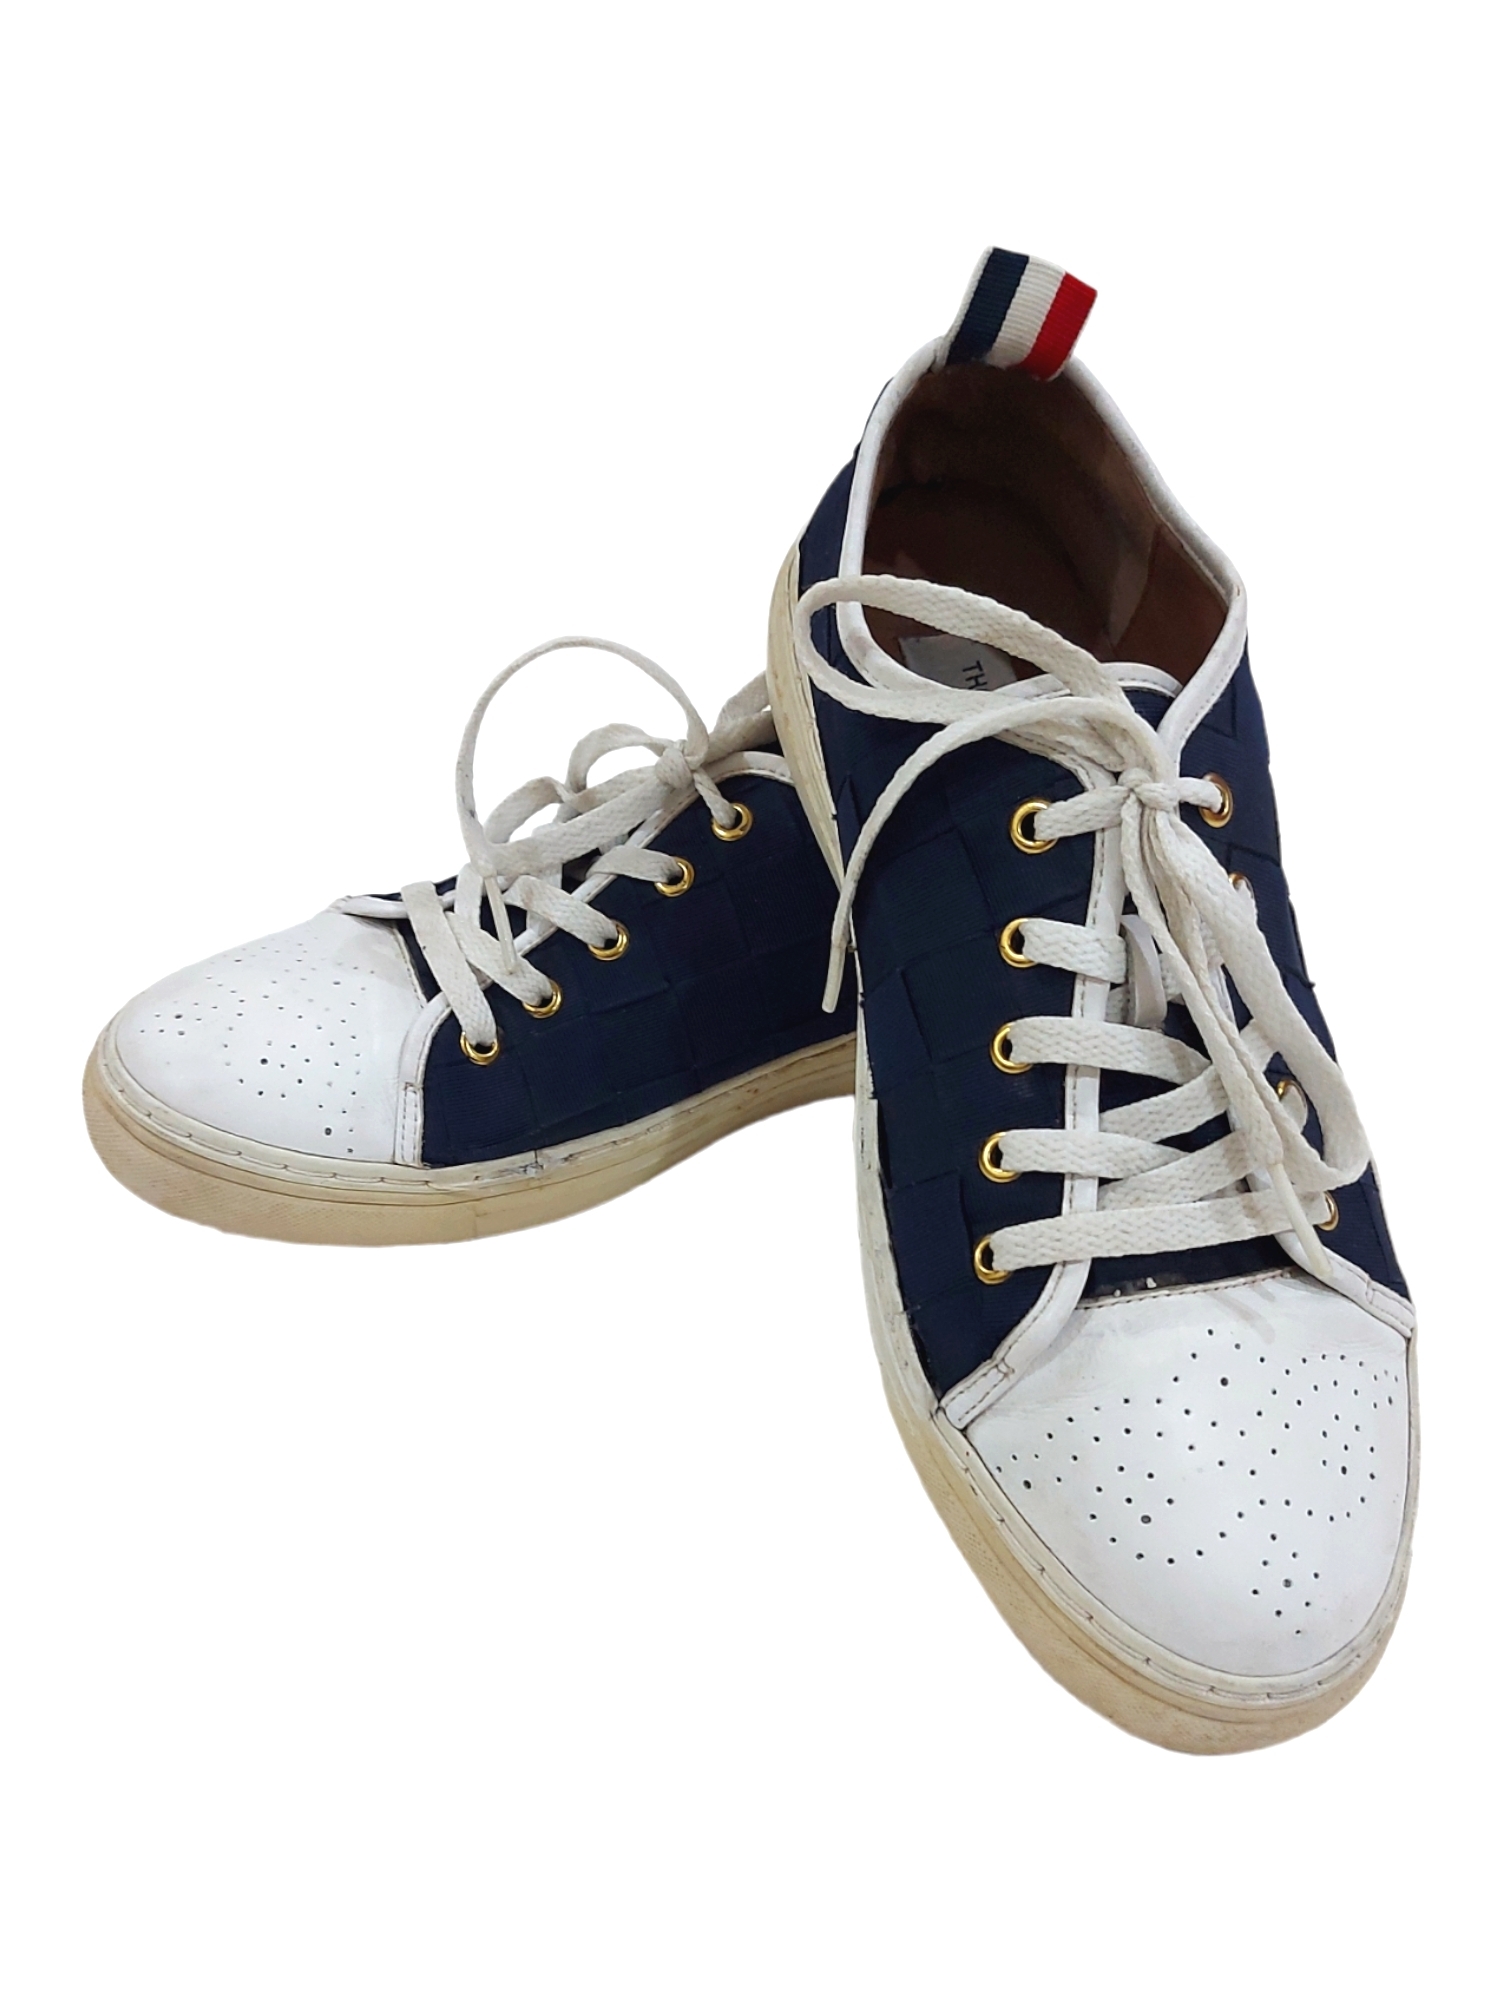 THOM BROWNE WOVEN NAVY SNEAKERS - 1